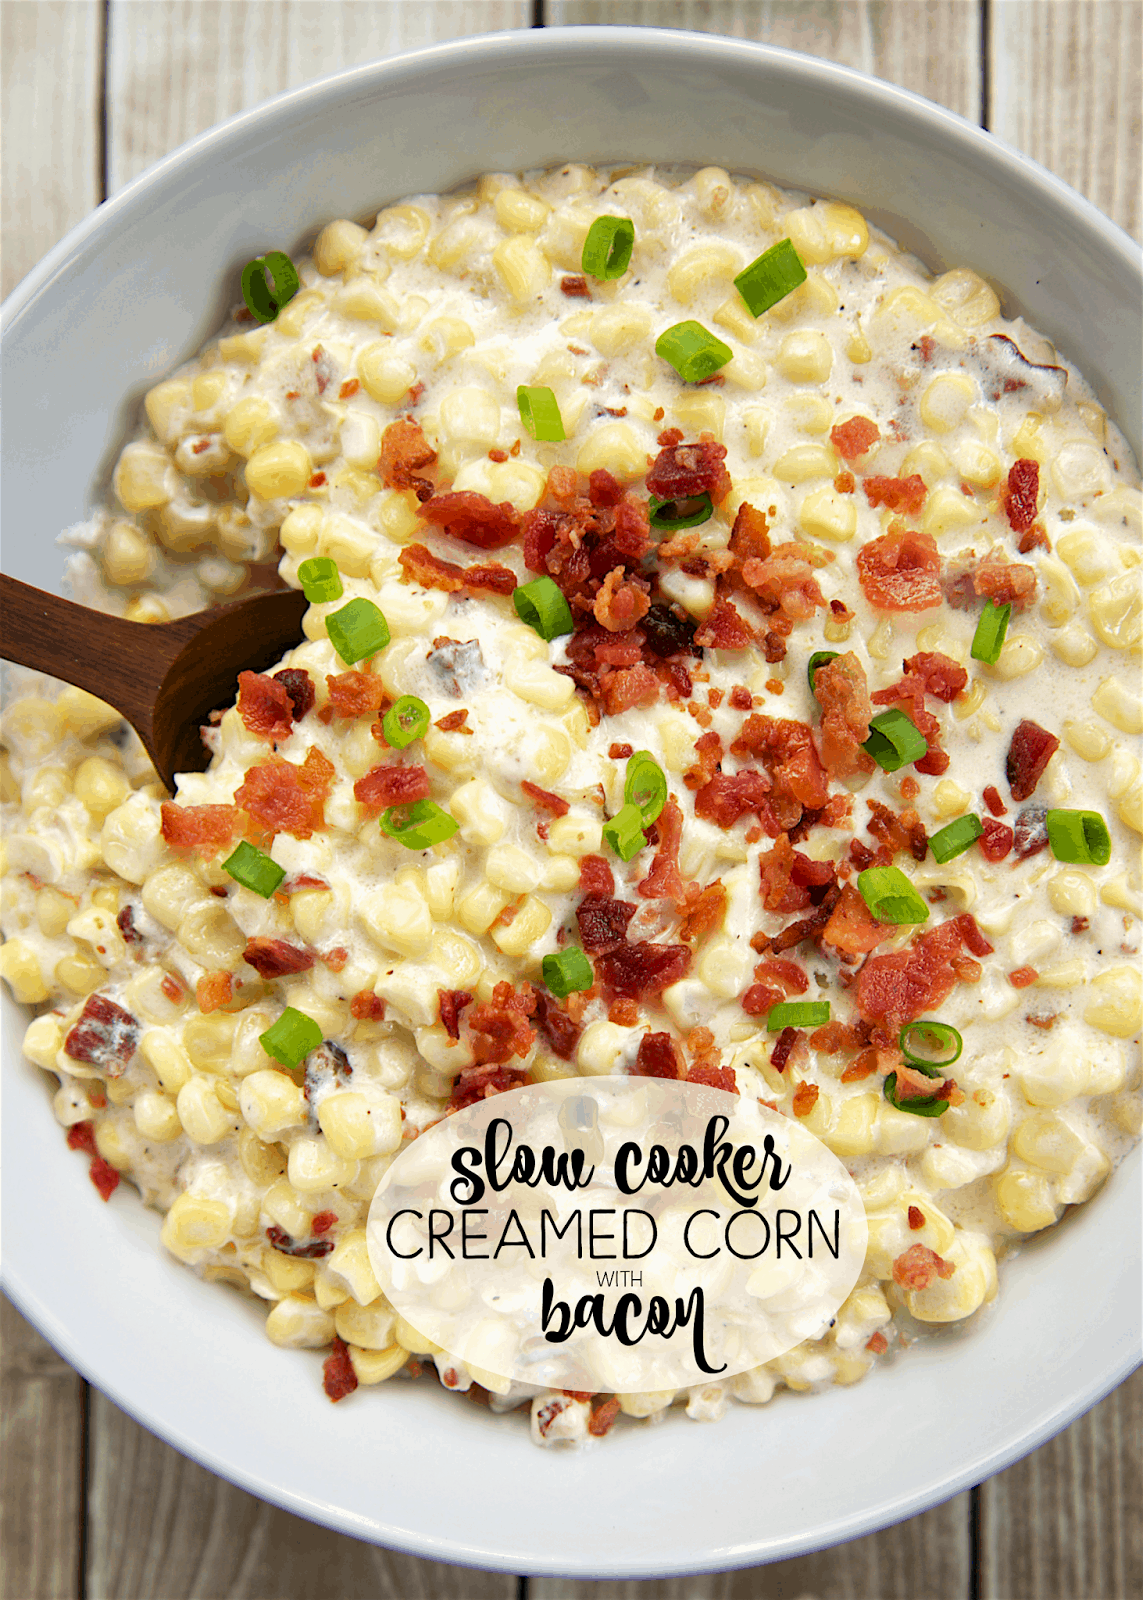 Slow Cooker Creamed Corn with Bacon - Corn, cream cheese, heavy cream, milk, bacon and green onions. YUM! It is super creamy with a hint of smokiness from the bacon. This recipe makes a lot and would be great for a potluck. This is seriously THE BEST corn recipe! I could have made a meal out of this! SO good!